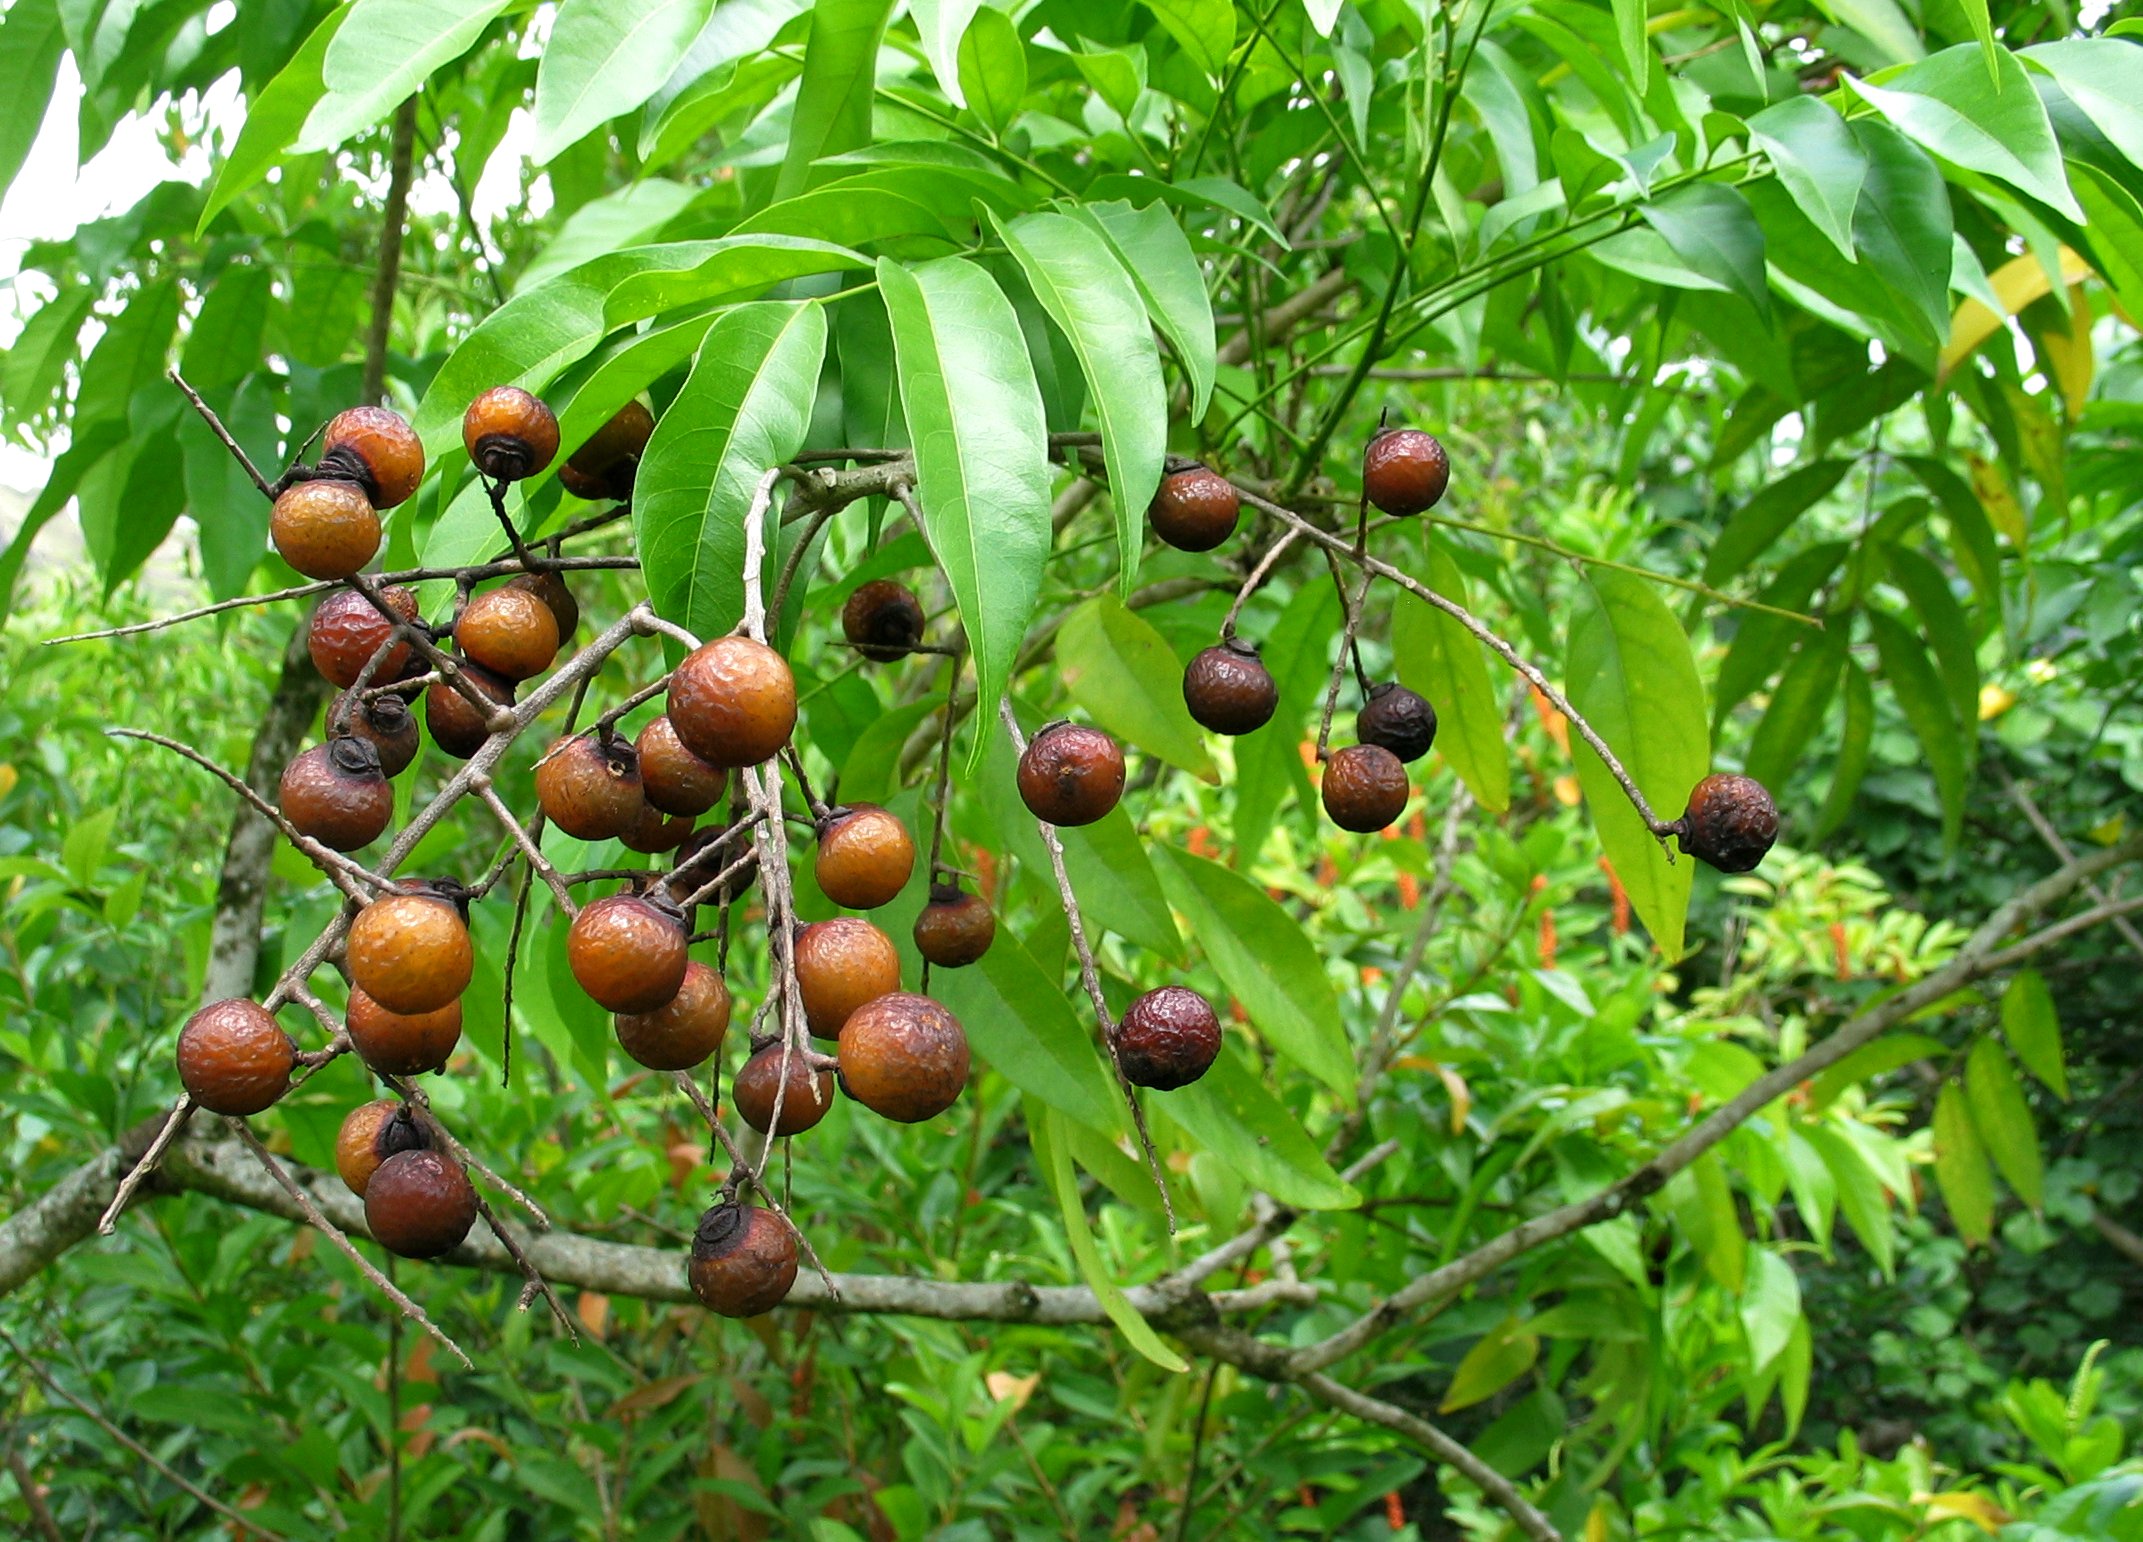 The source of the soap nuts